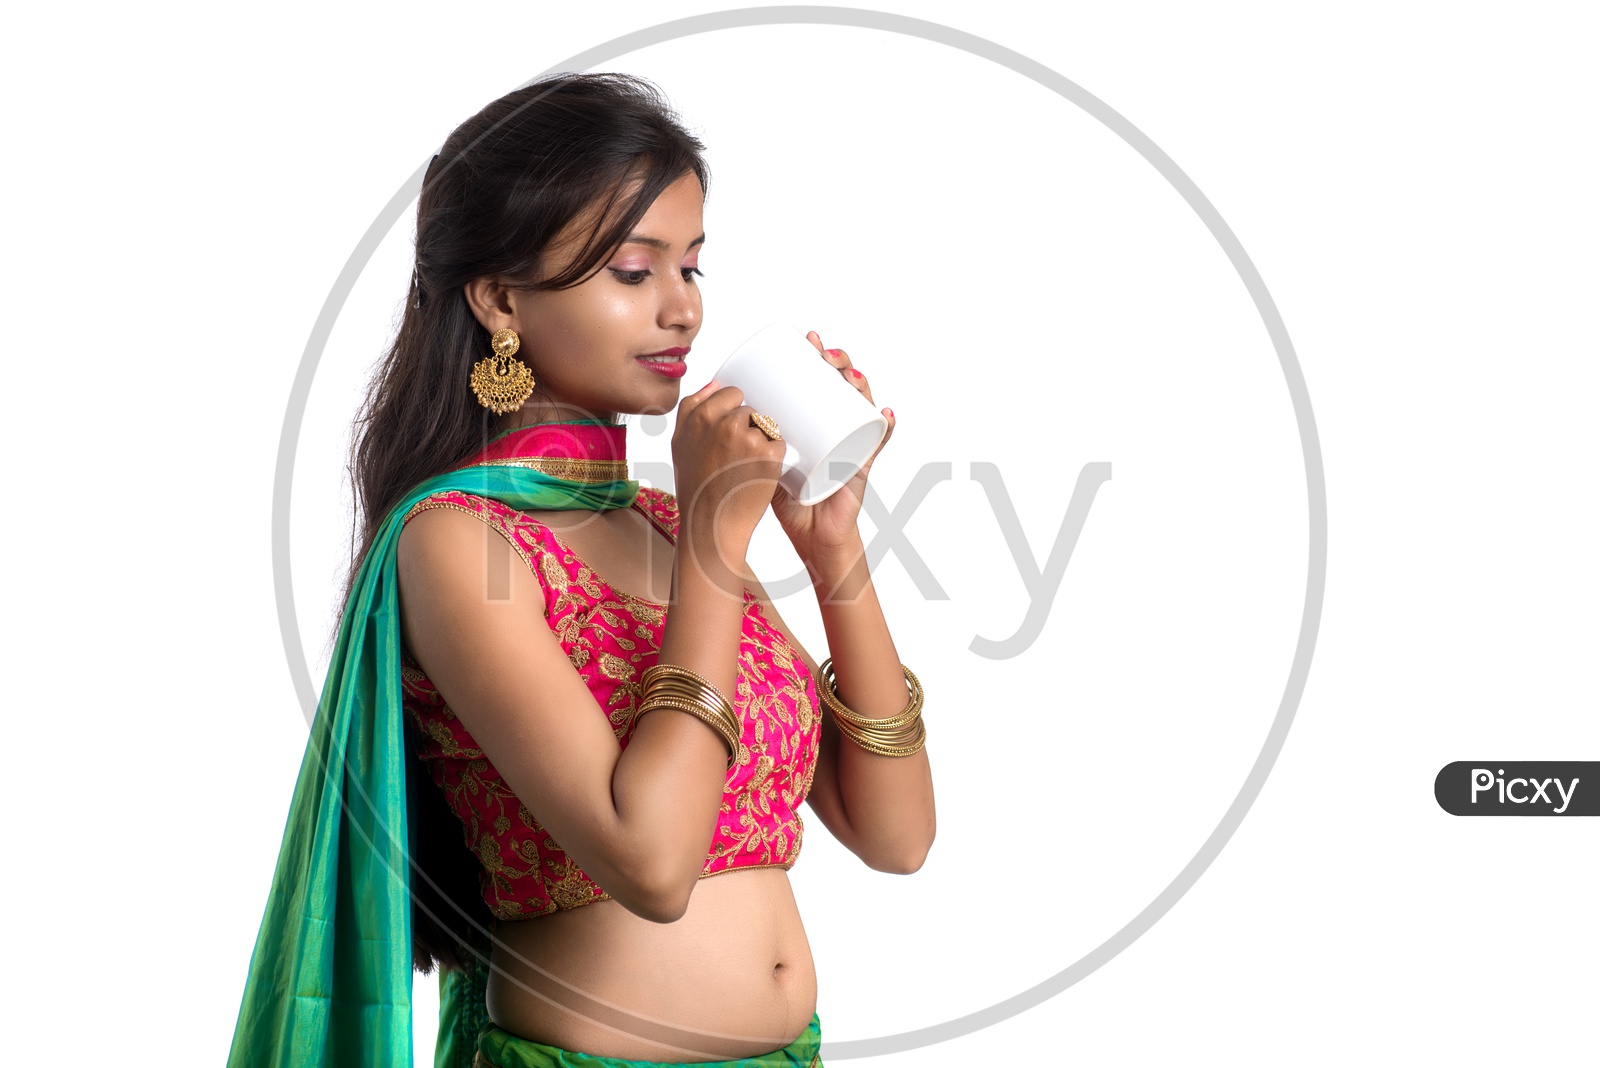 Portrait Of a Young Indian  Traditional Girl Enjoying A Cup Of Tea Or Coffee Over a White Background